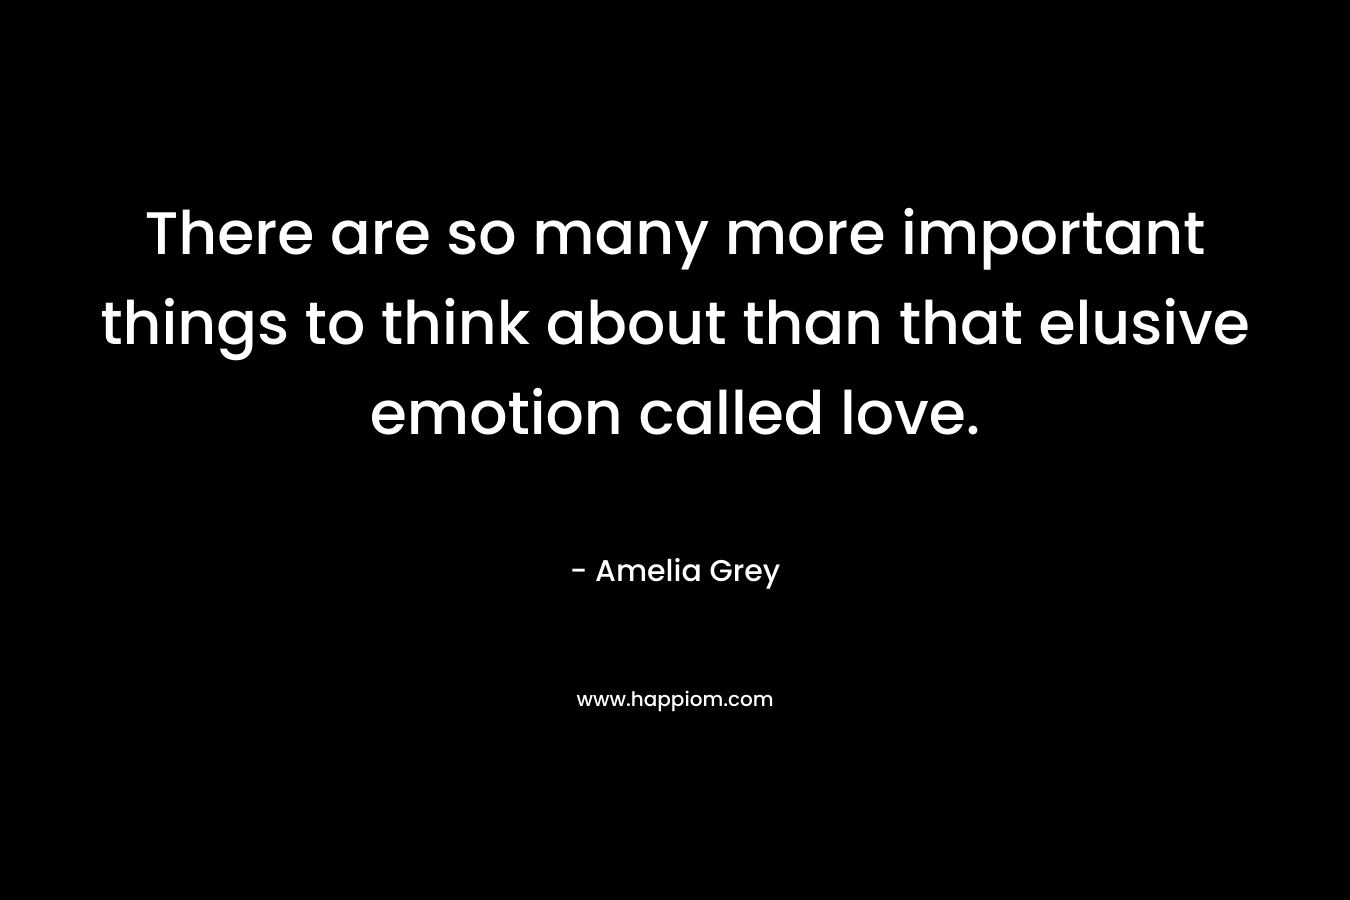 There are so many more important things to think about than that elusive emotion called love.